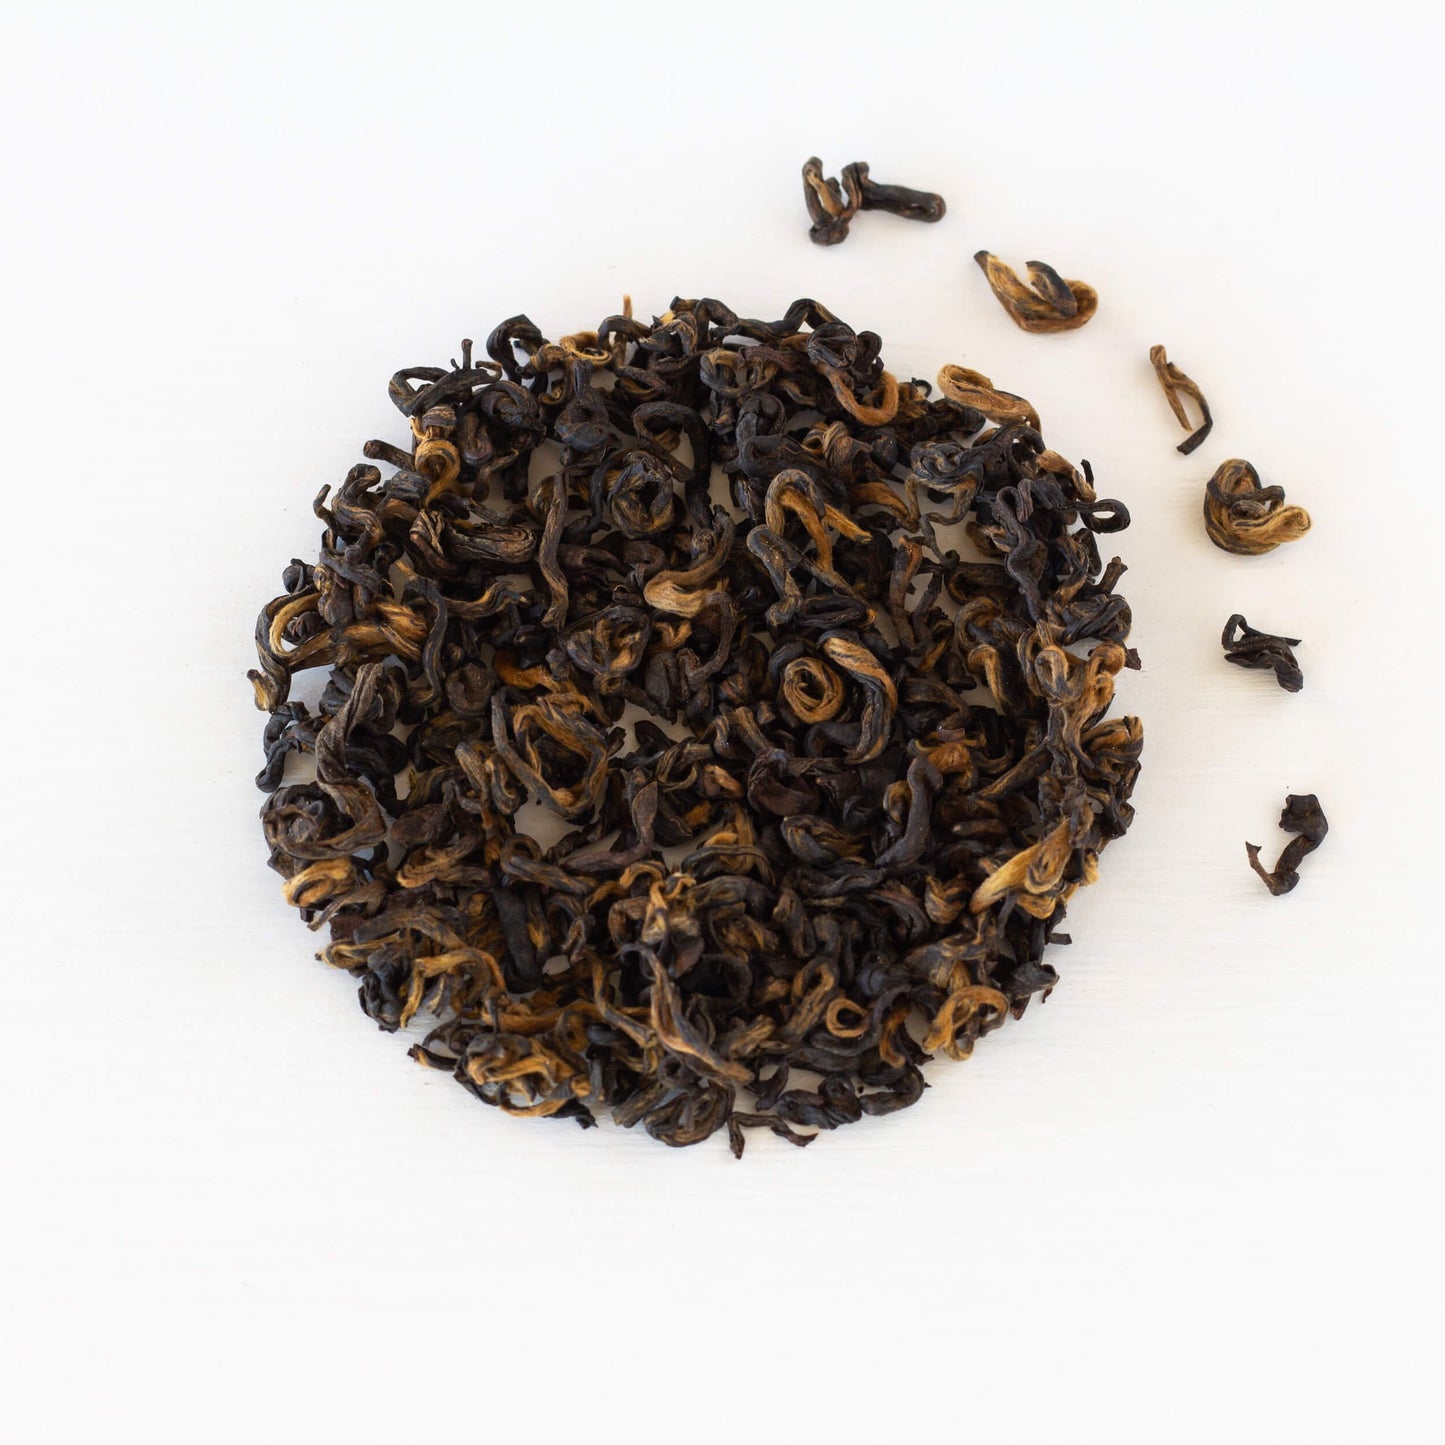 Nepalese Gold Black Tea shown from above as loose tea leaves in a tight circle with a few leaves to the right of the circle